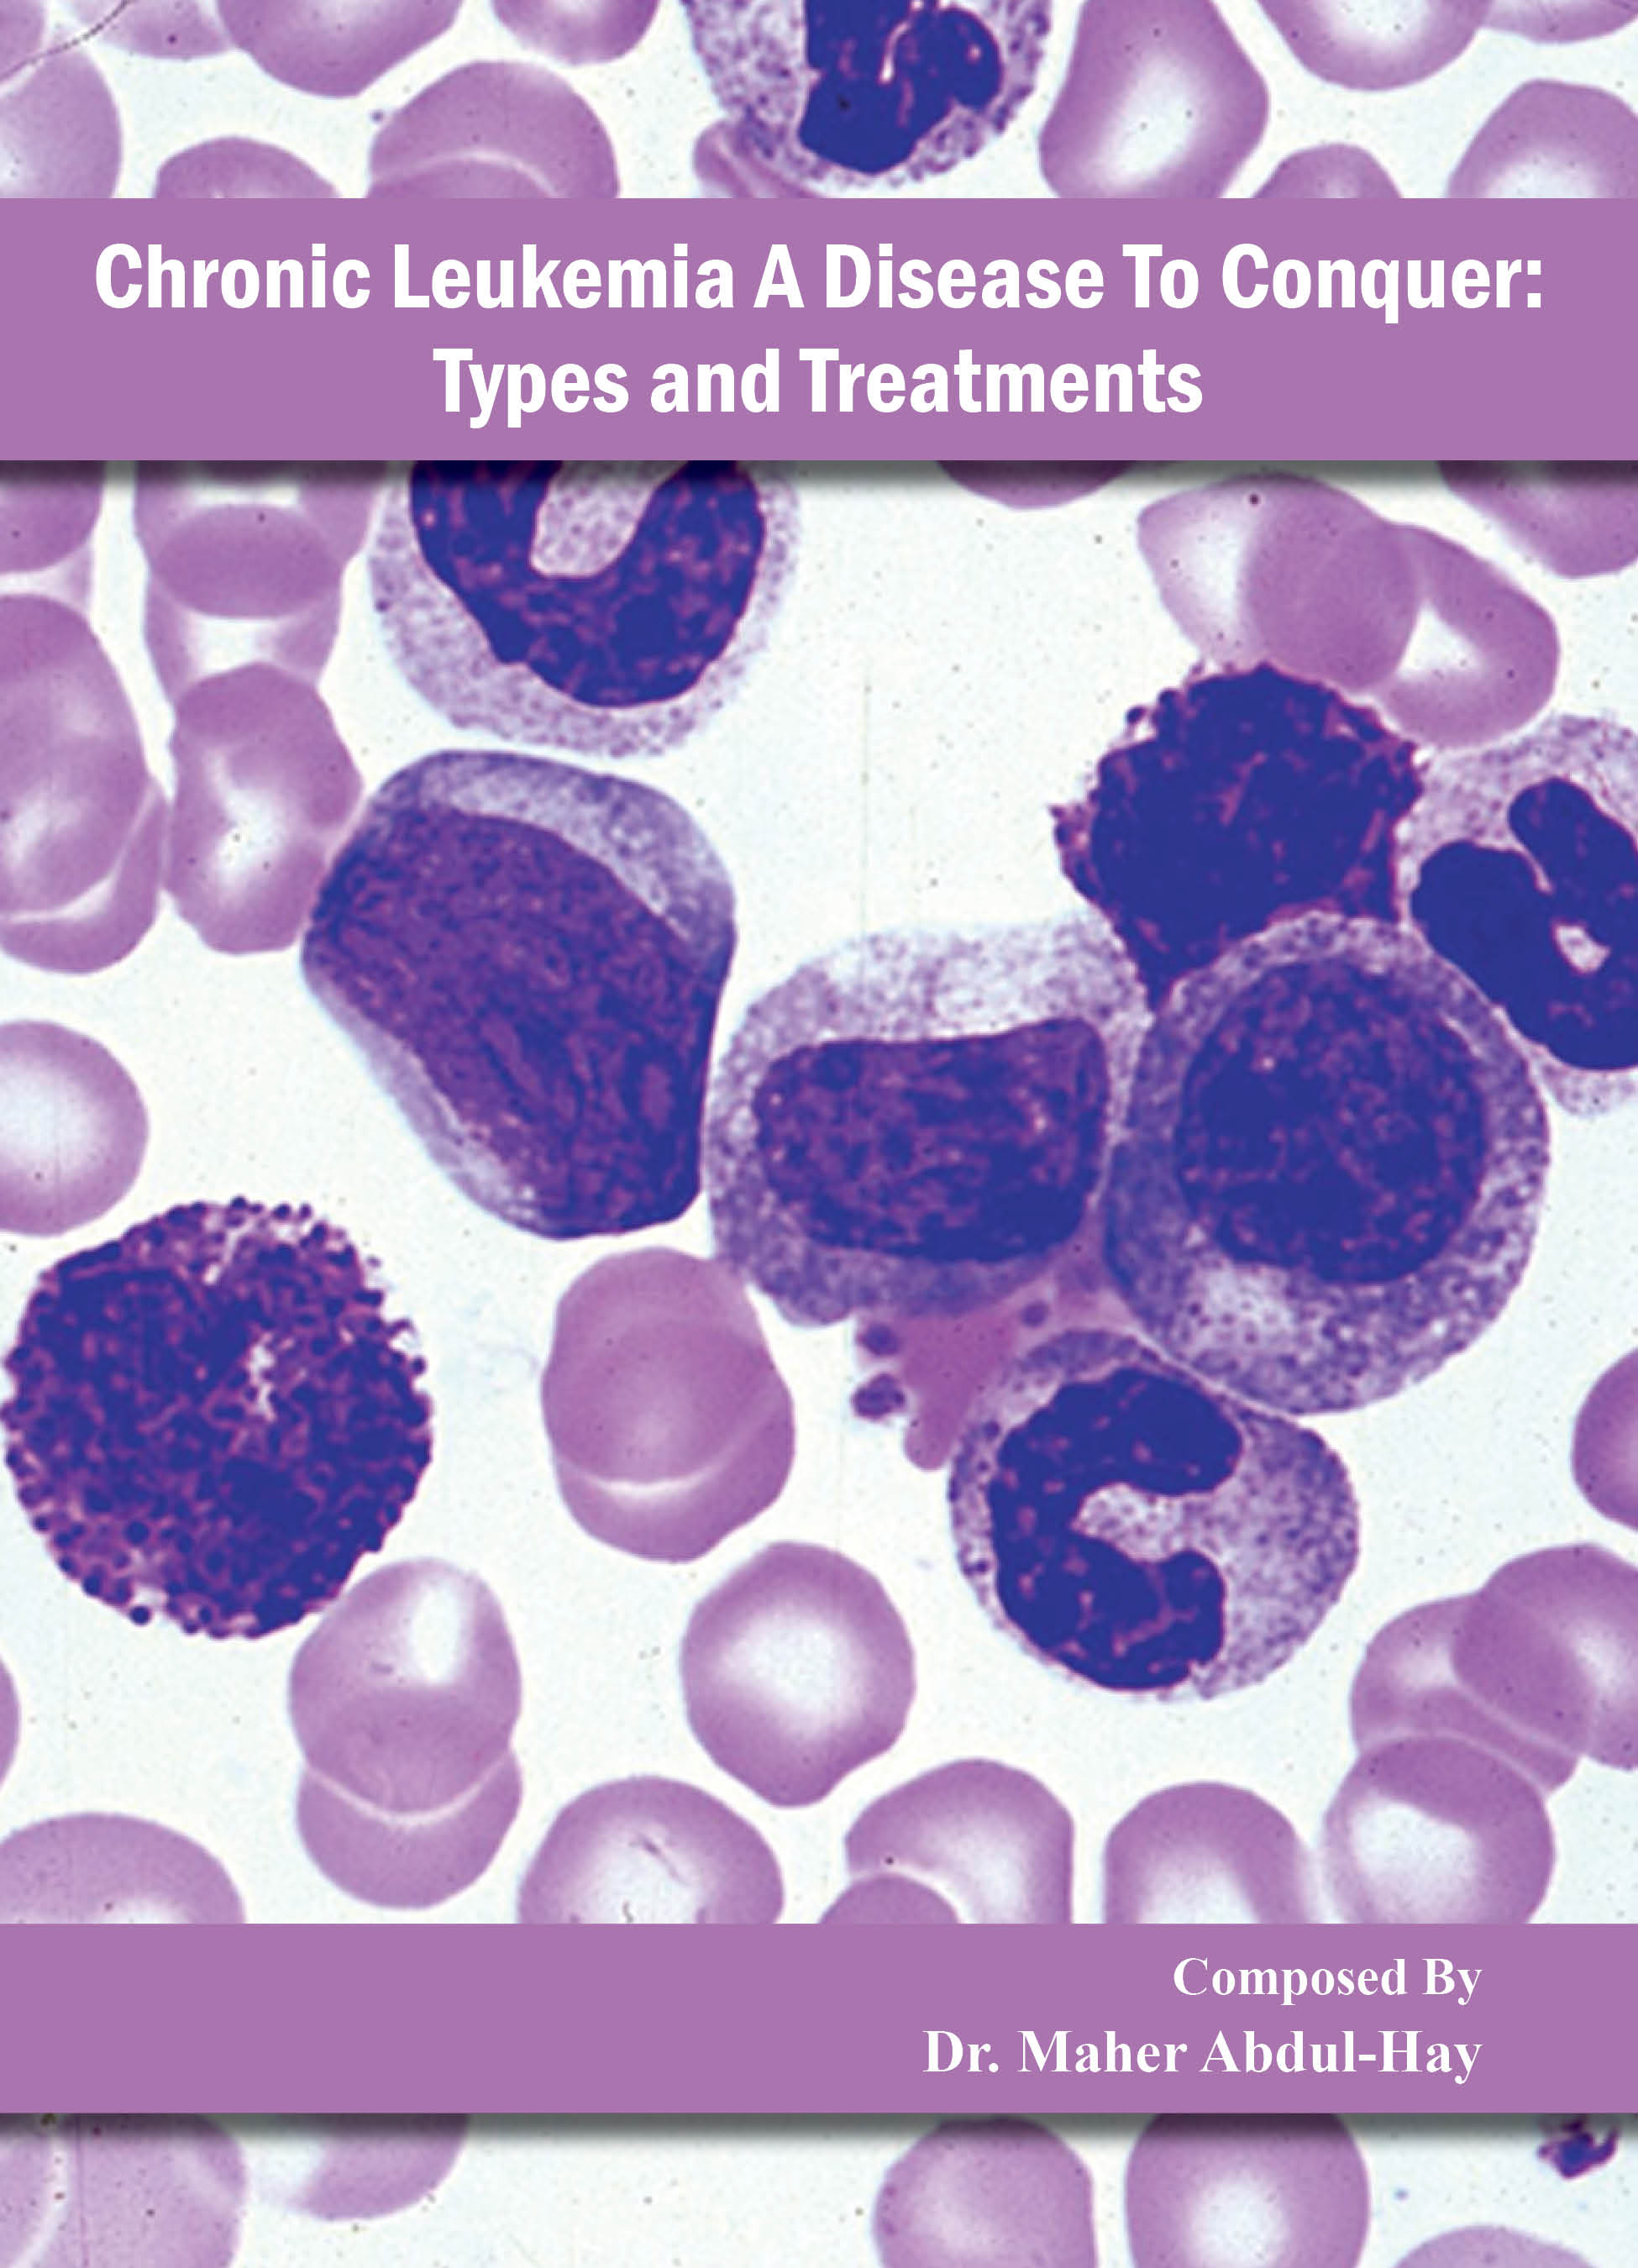 Chronic Leukemia - A Disease to Conquer: Types and Treatments